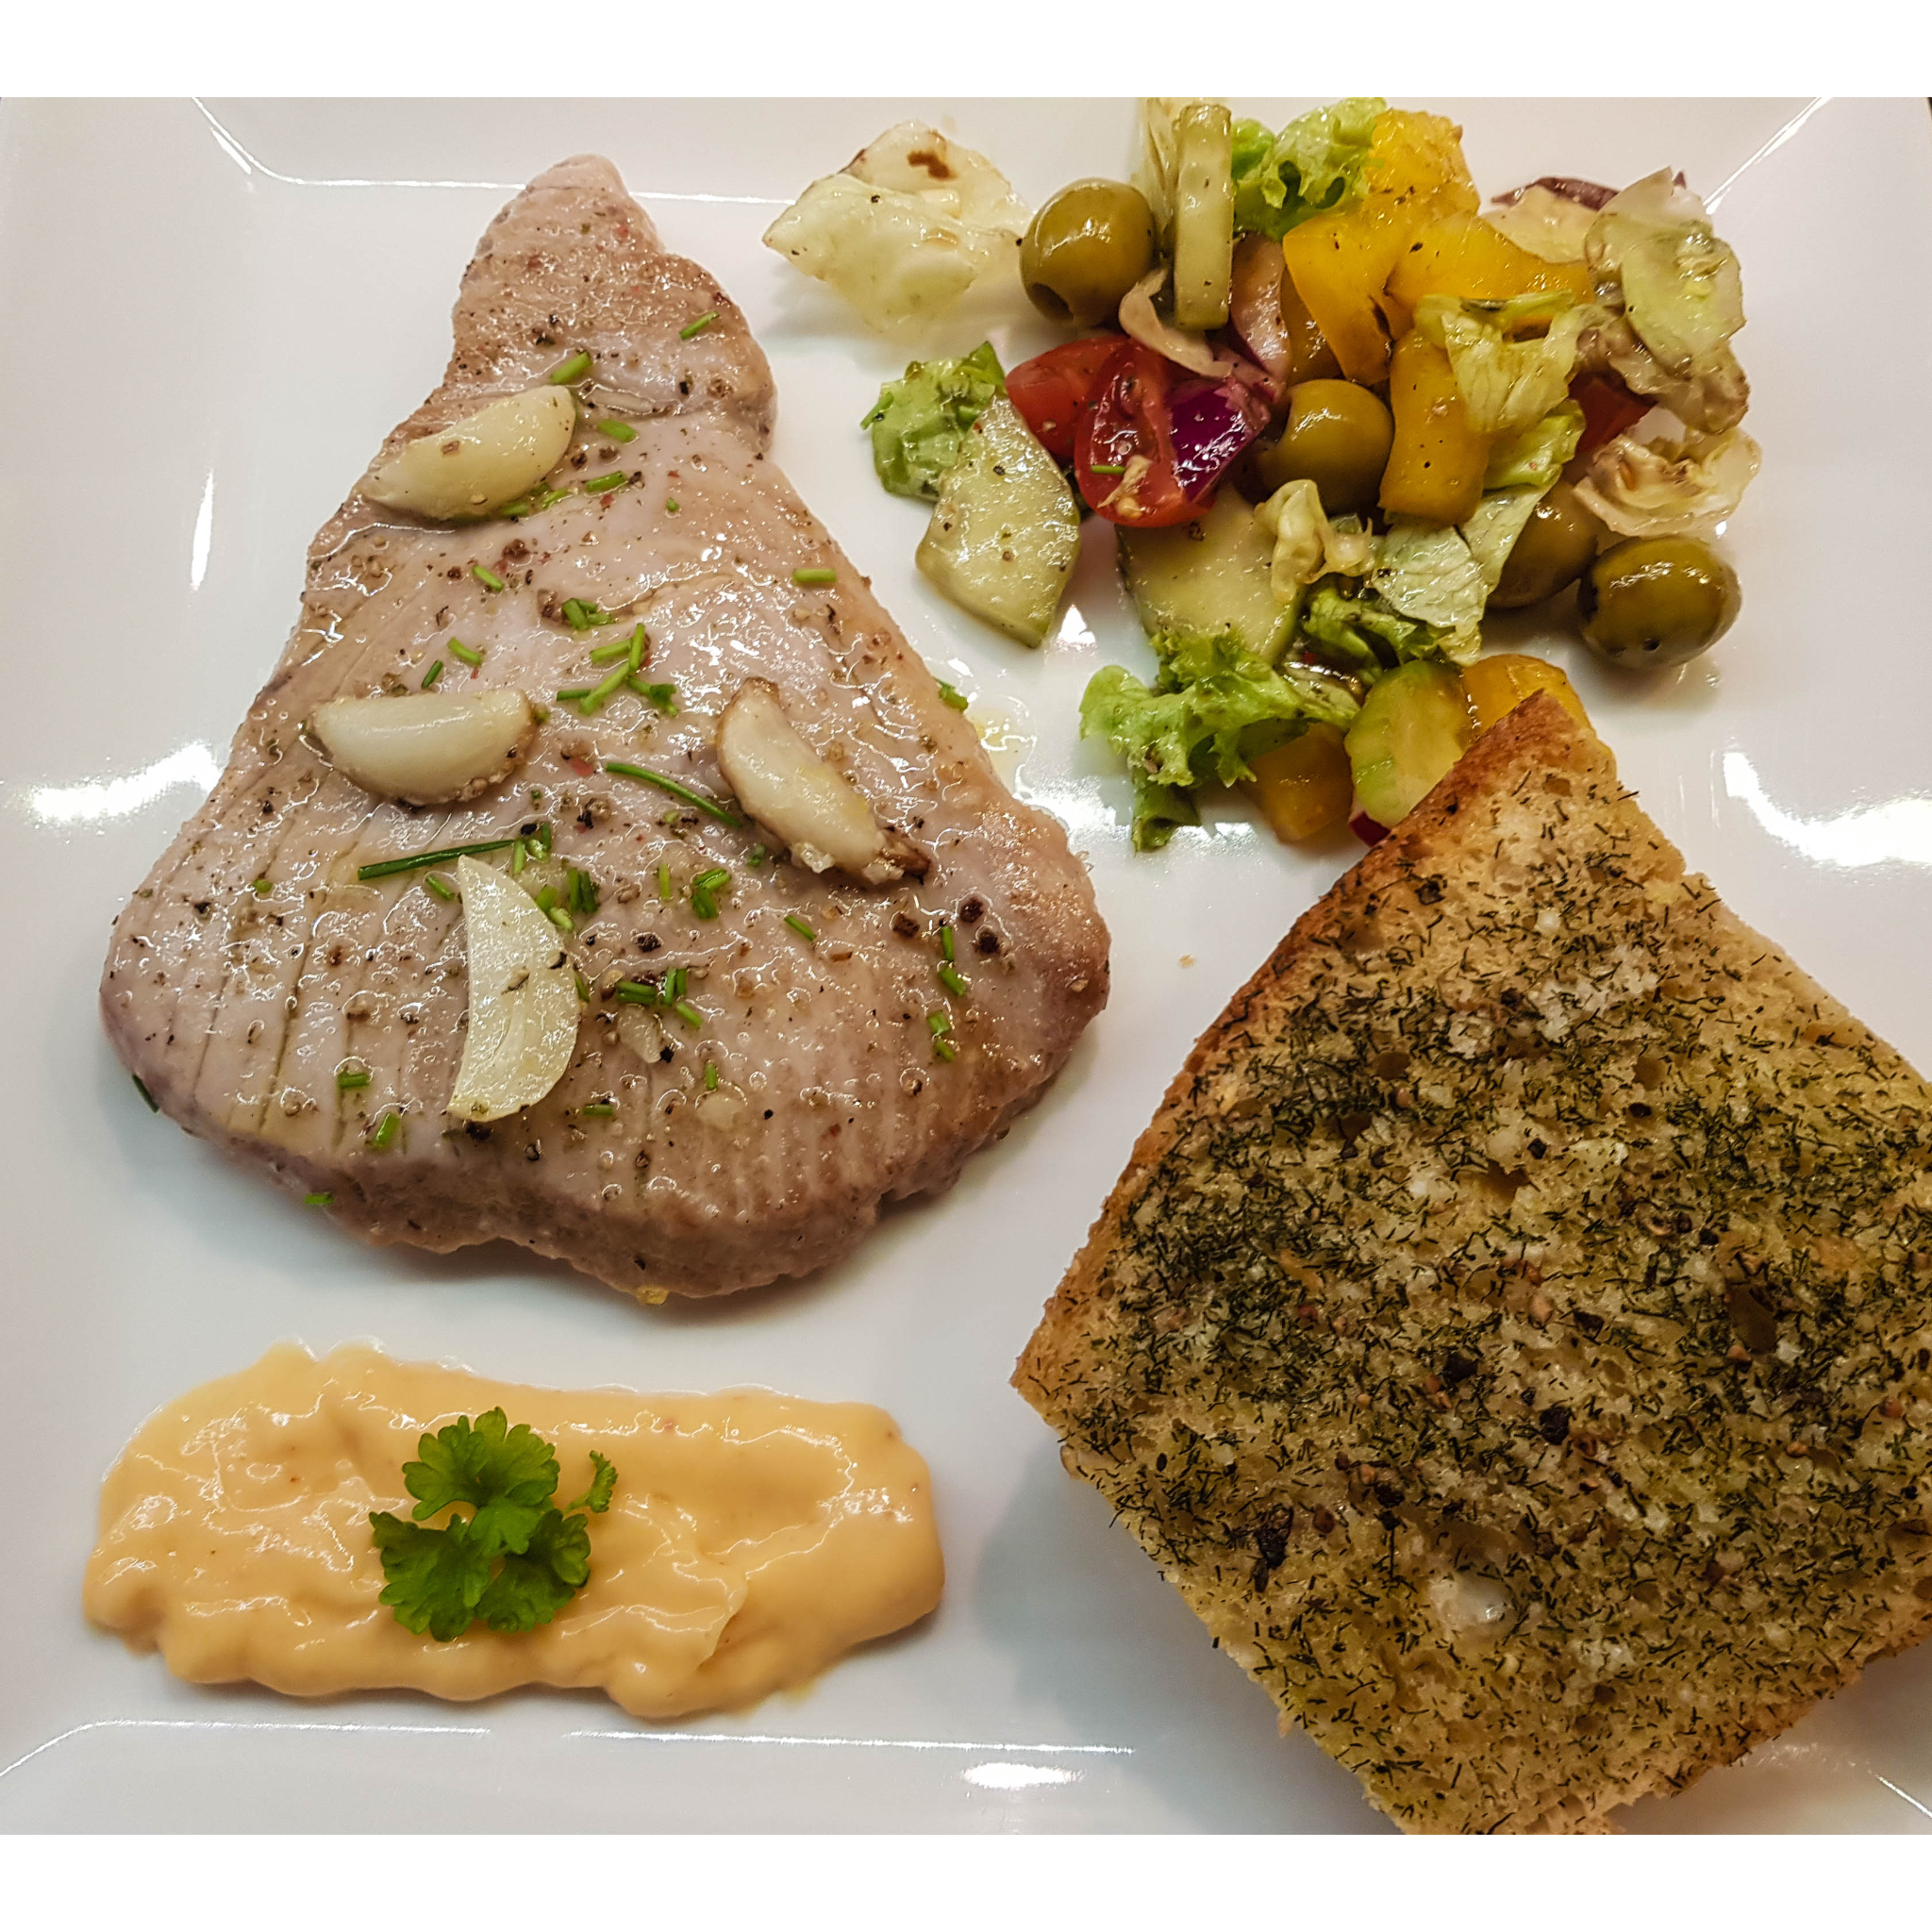 Yellow Fin Tuna Steaks with sauce and salad from Steve Costi seafood